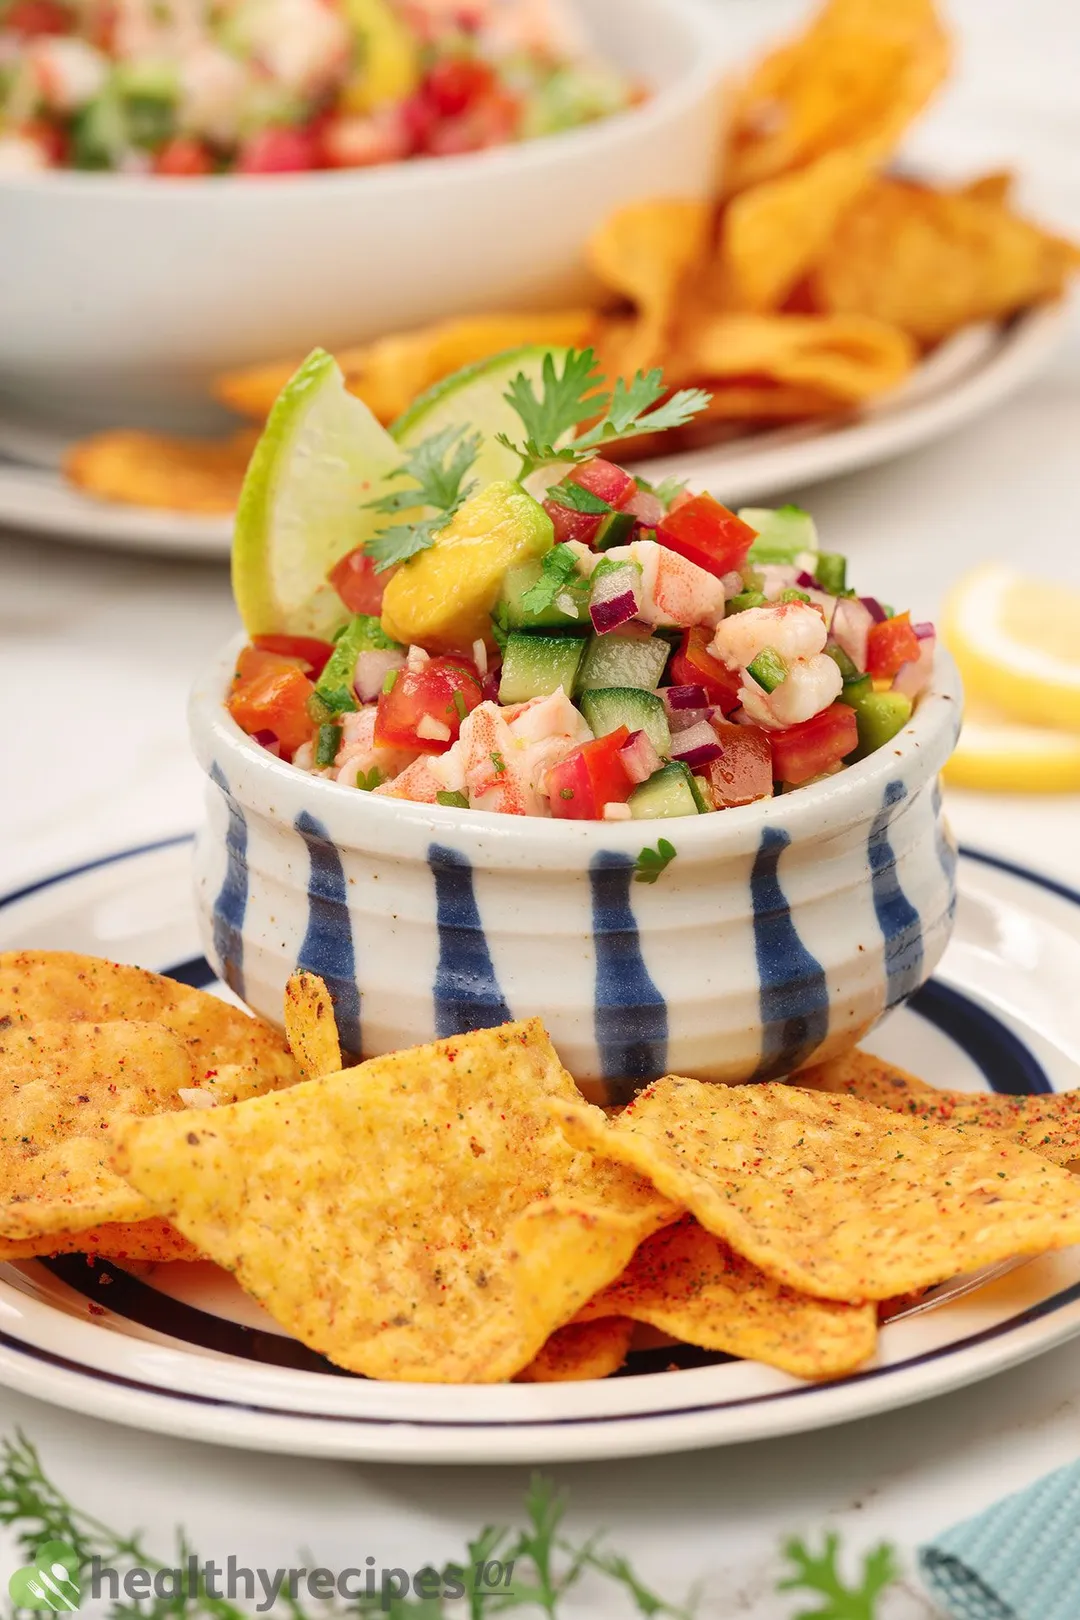 How to Cook Shrimp Ceviche